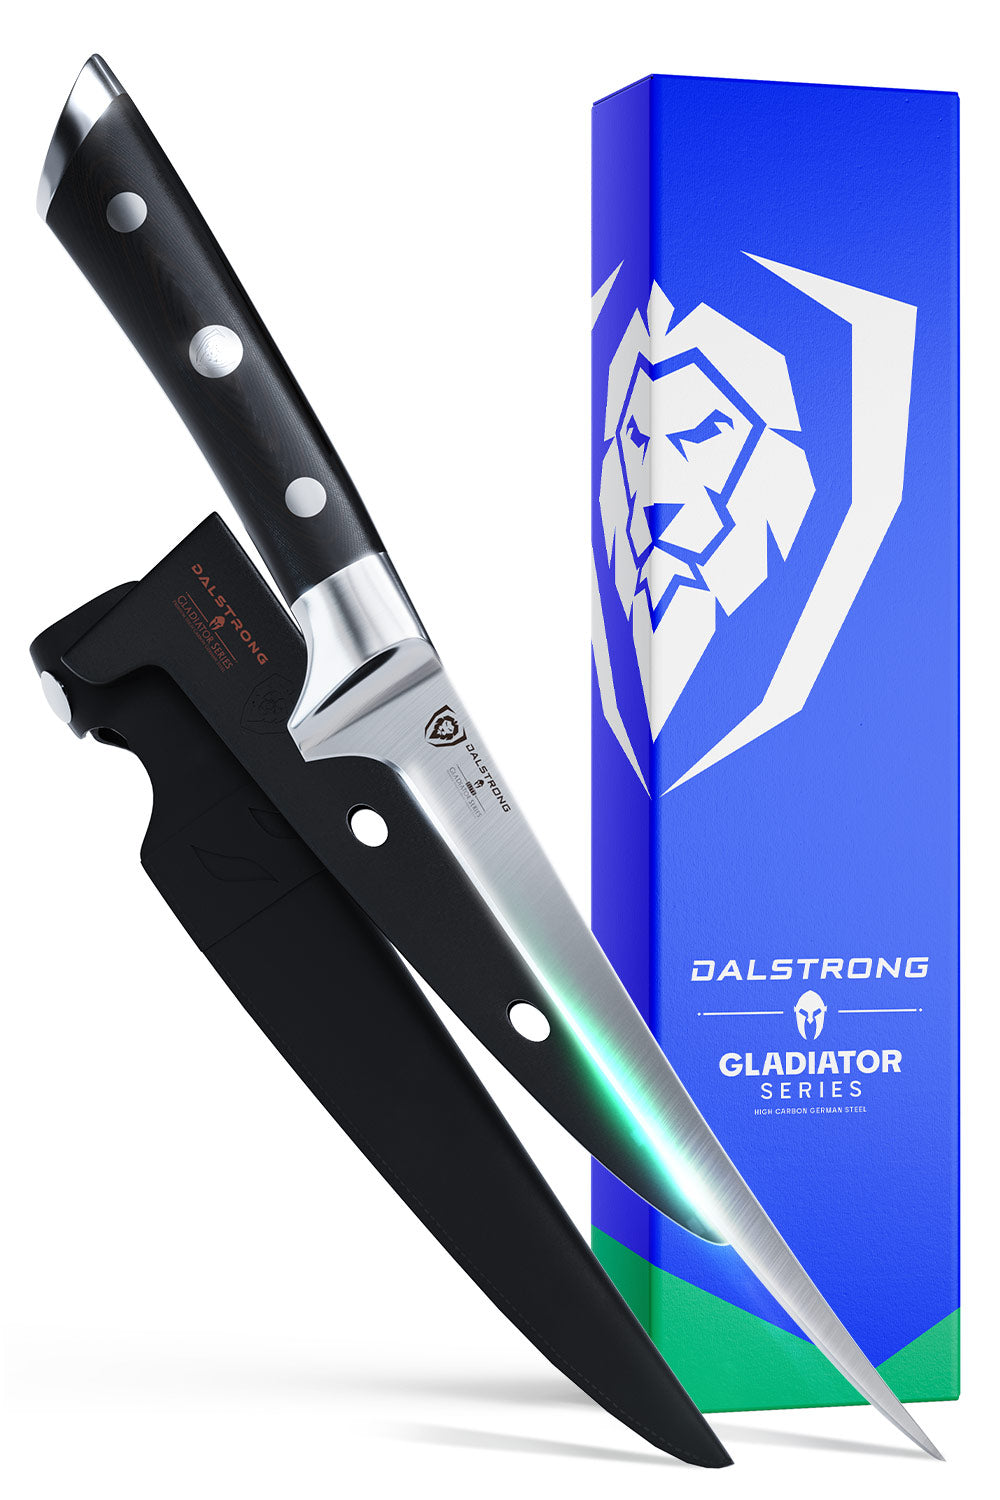 Dalstrong gladiator series 7 inch fillet knife with black handle in front of it's premium packaging.